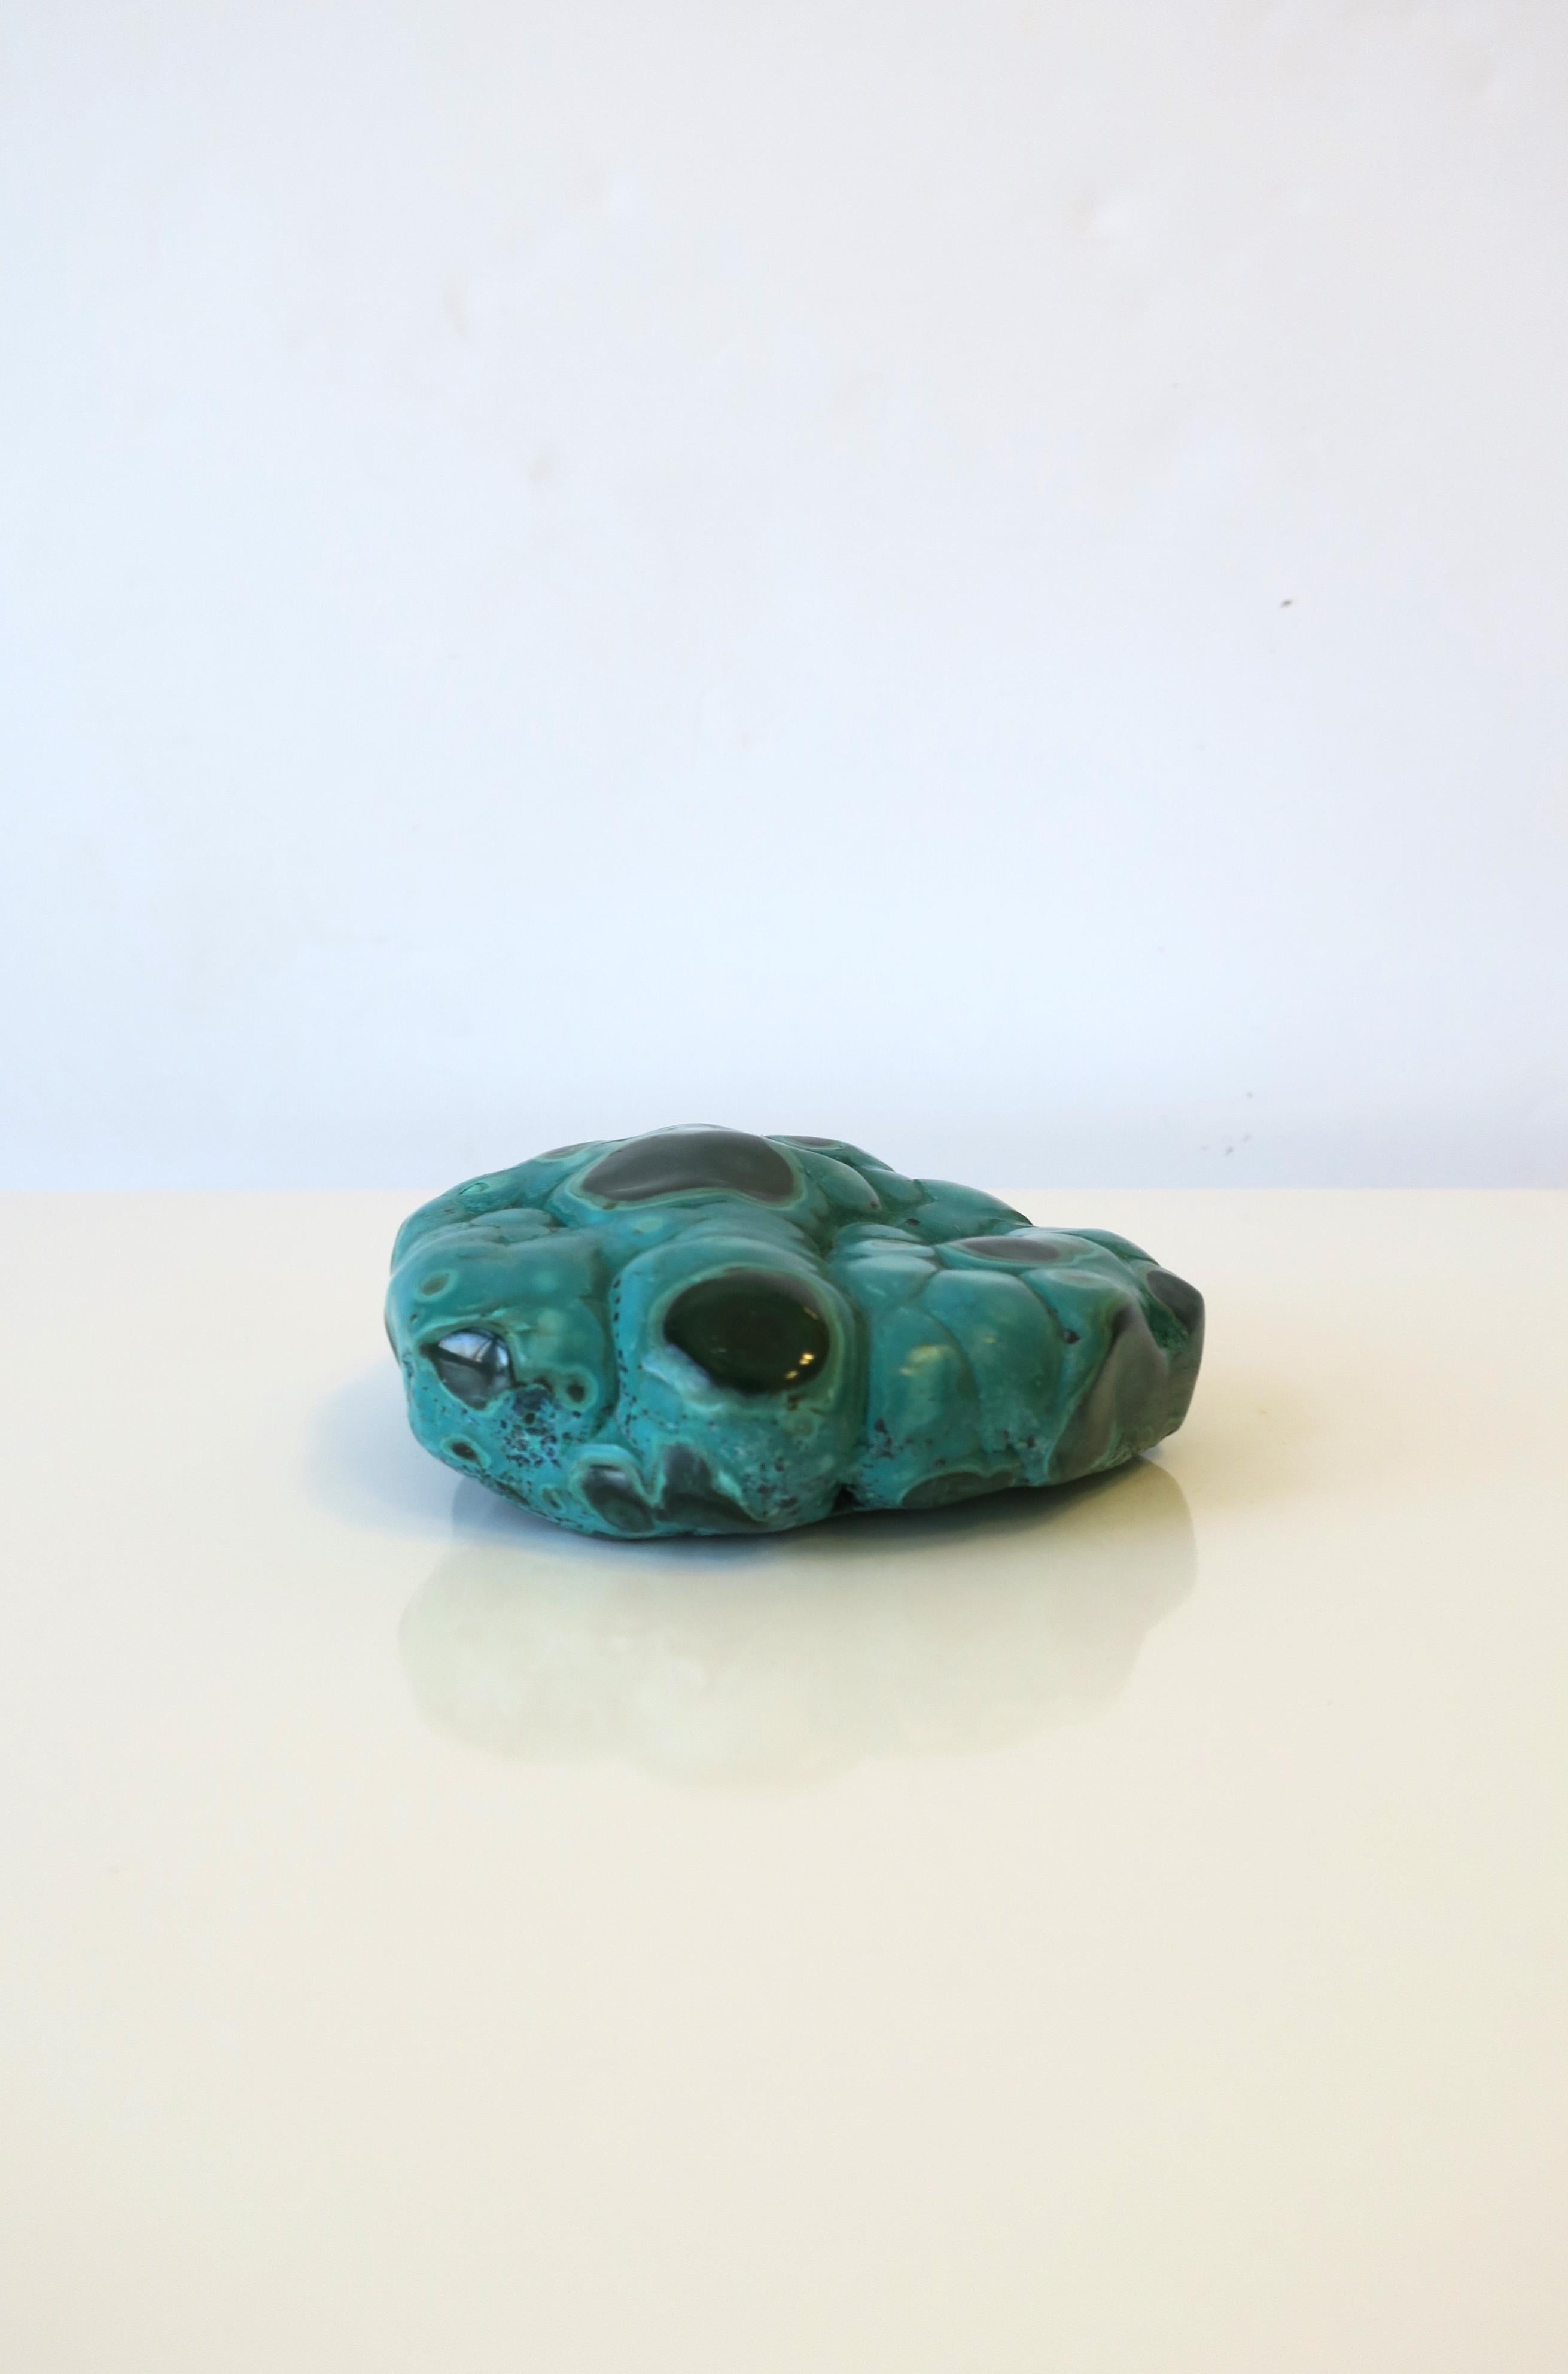 Green Malachite Paperweight or Decorative Object For Sale 5